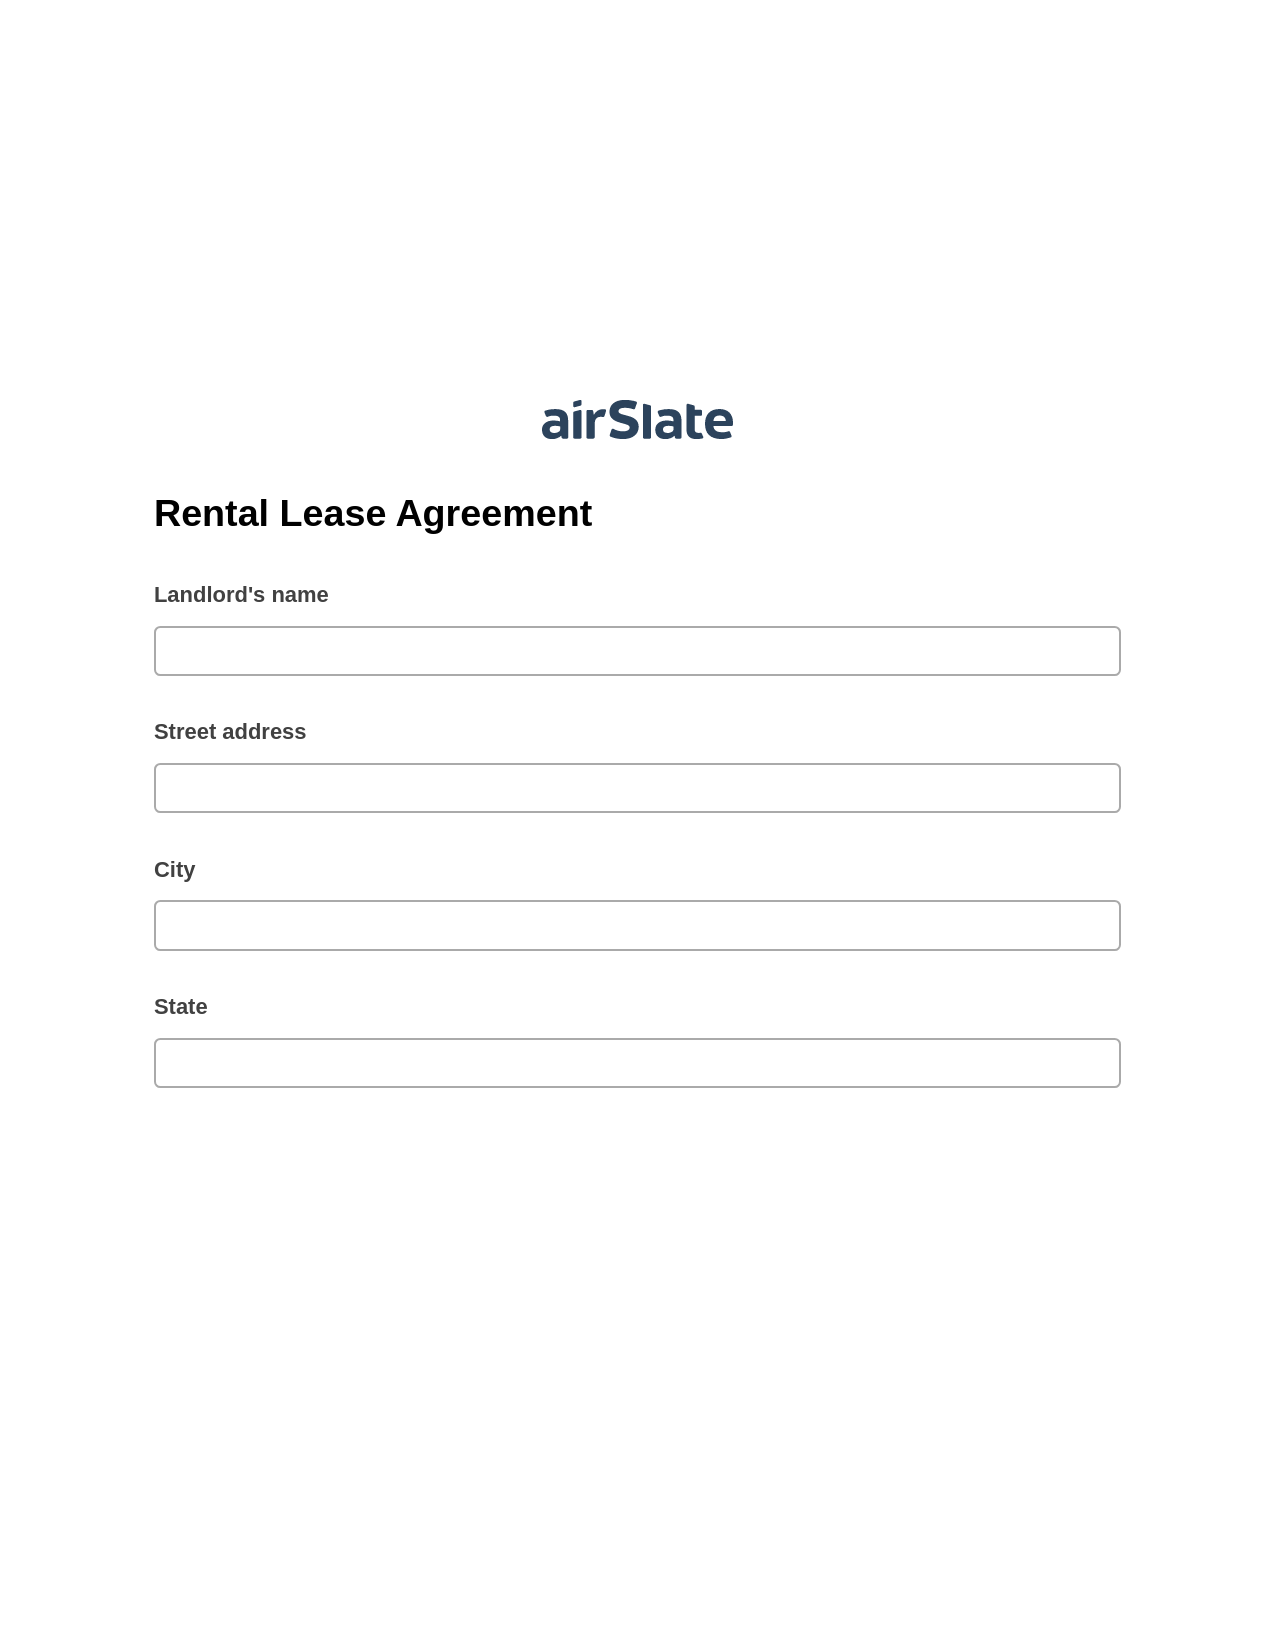 Rental Lease Agreement Pre-fill from Google Sheets Bot, Audit Trail Bot, Export to NetSuite Record Bot